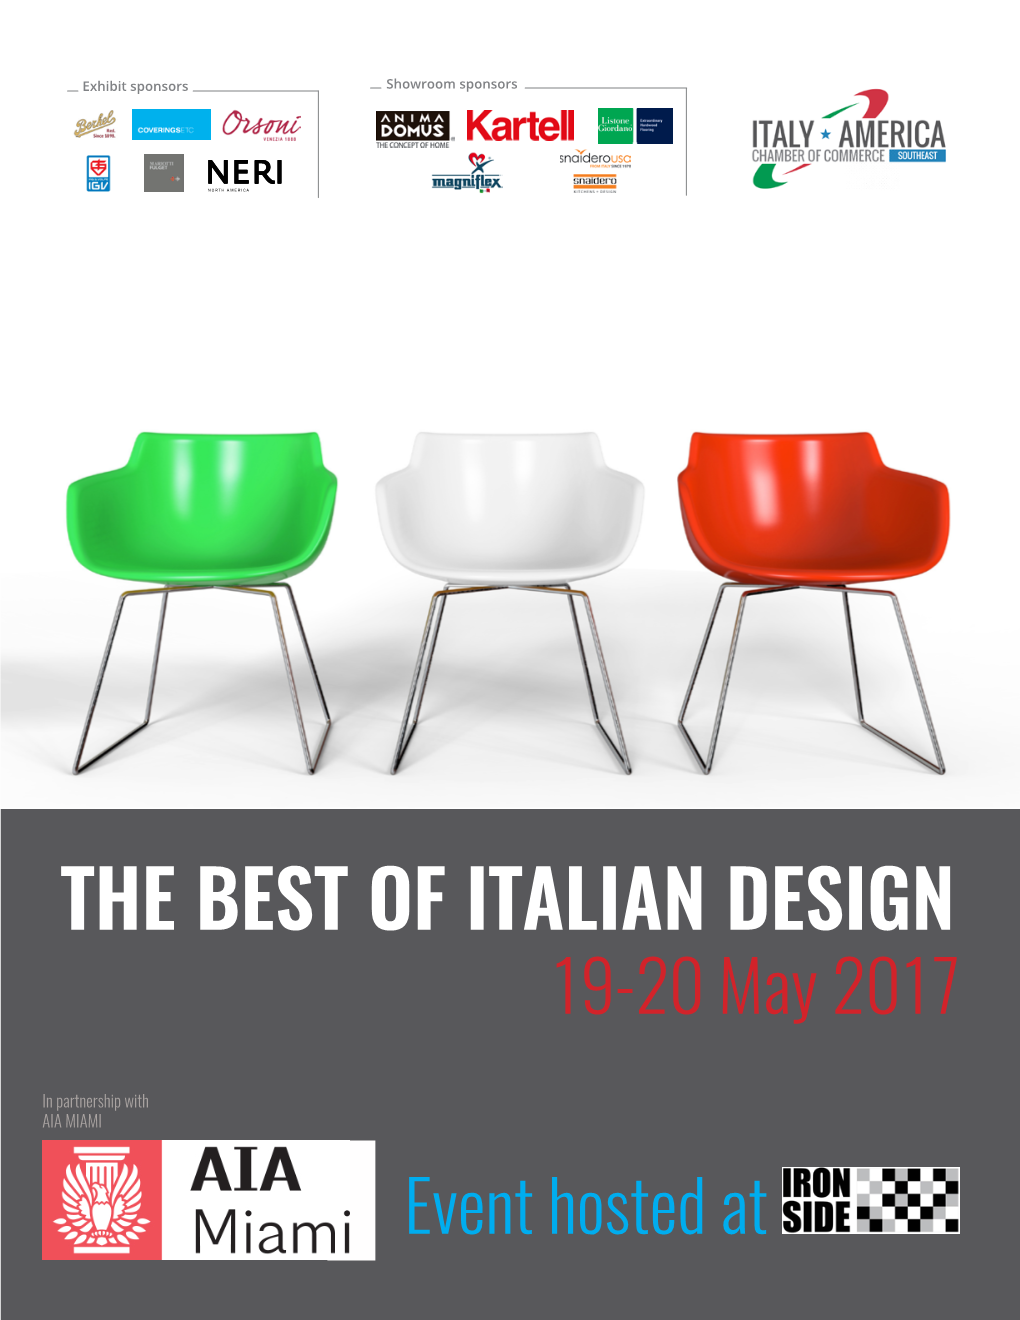 THE BEST of ITALIAN DESIGN 19-20 May 2017